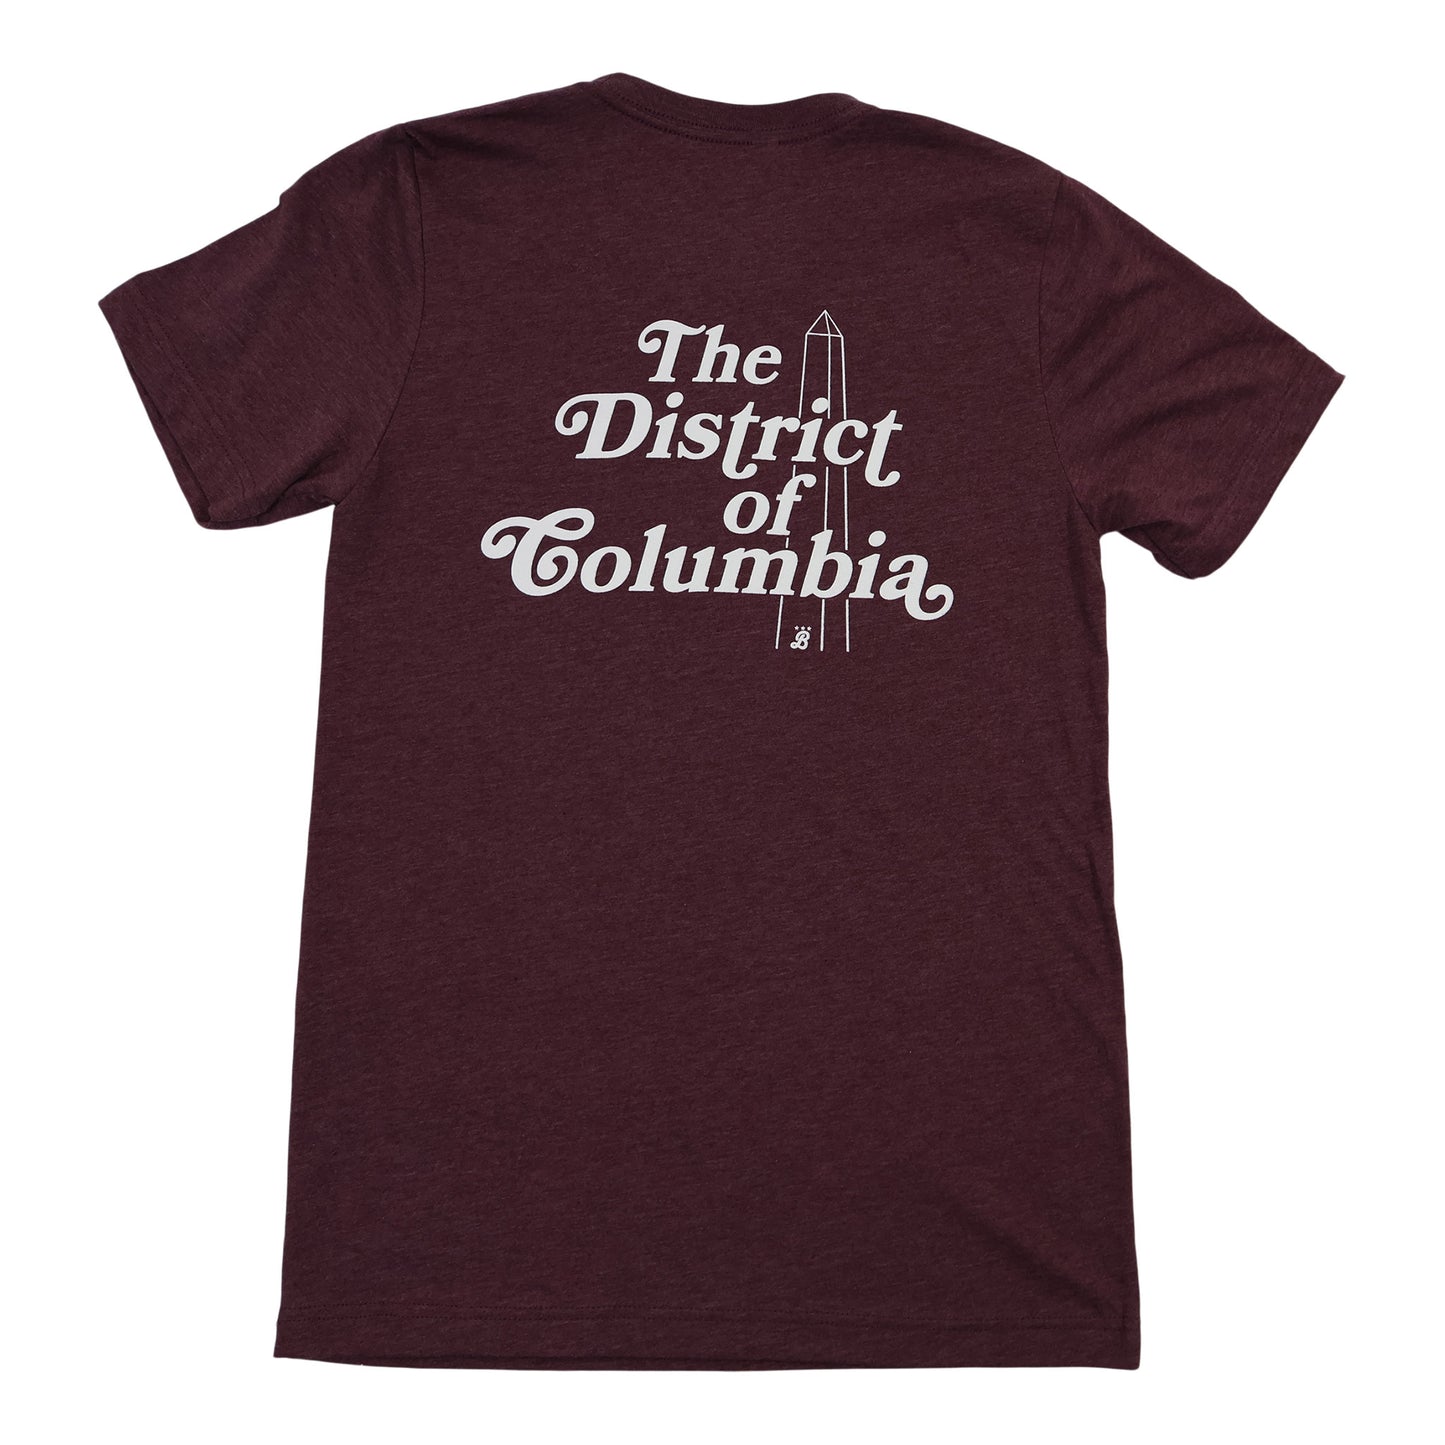 Unisex 'The District of Columbia' double-sided T-shirt